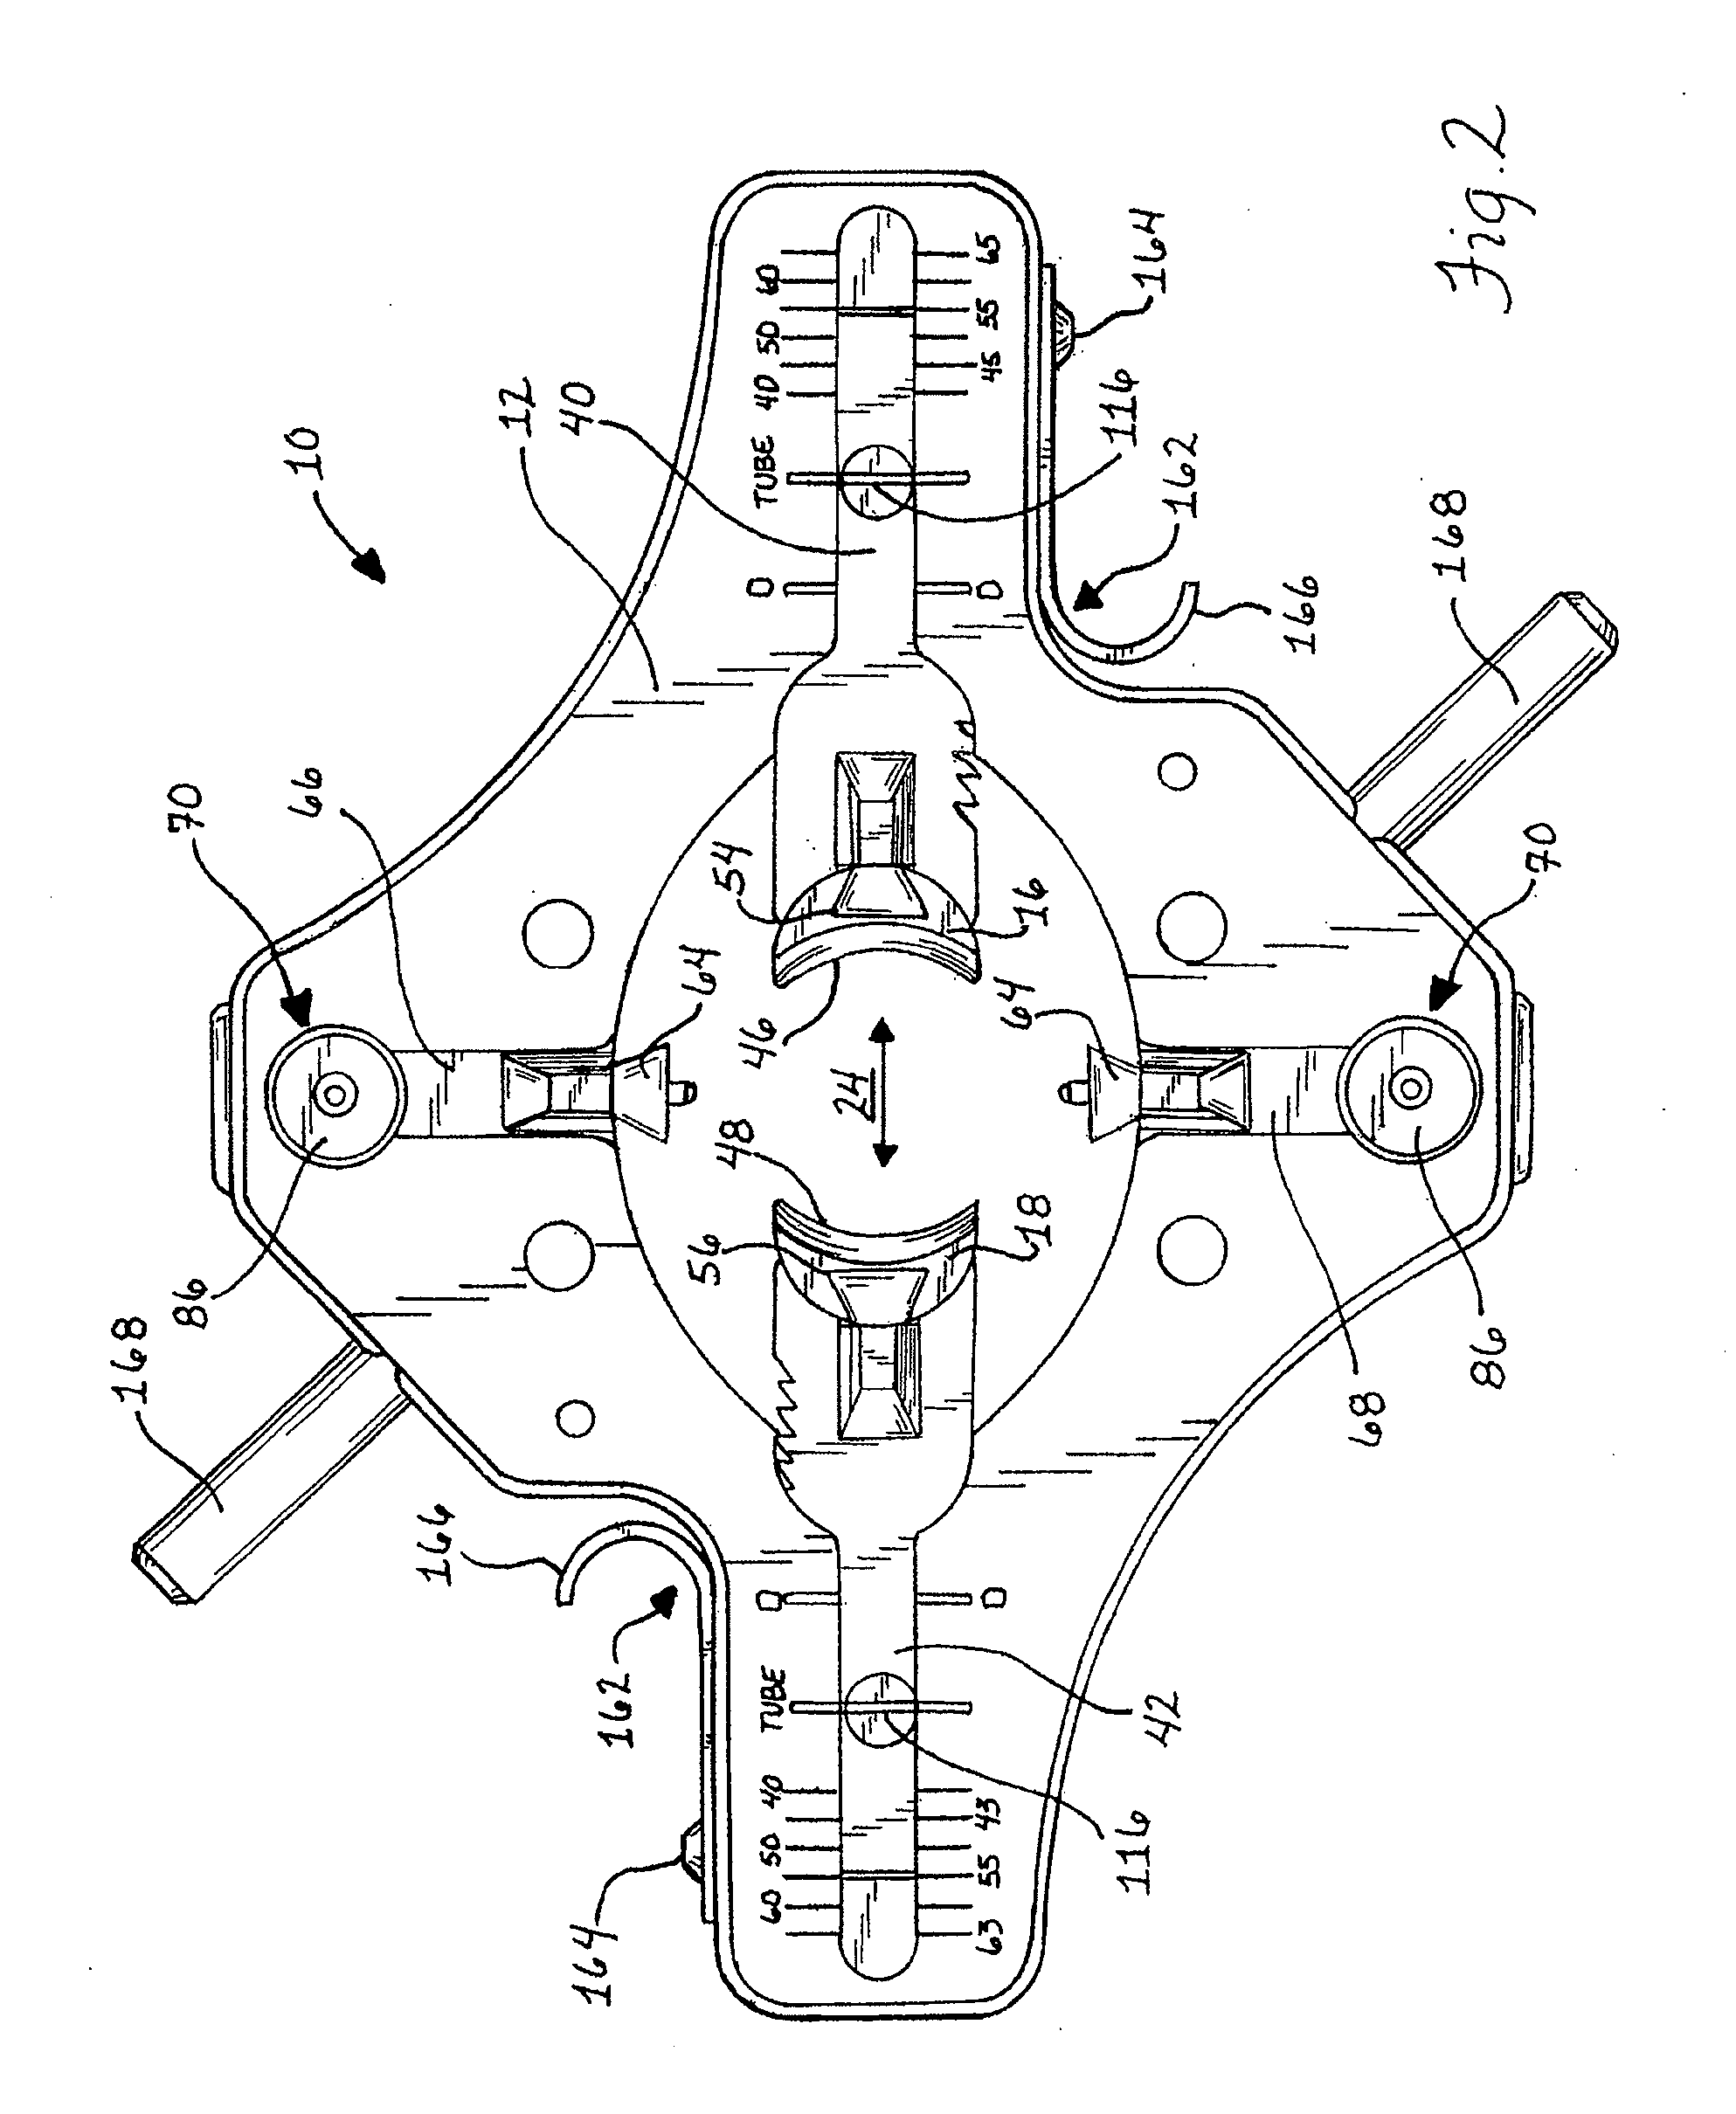 Retraction Apparatus and Method of Use